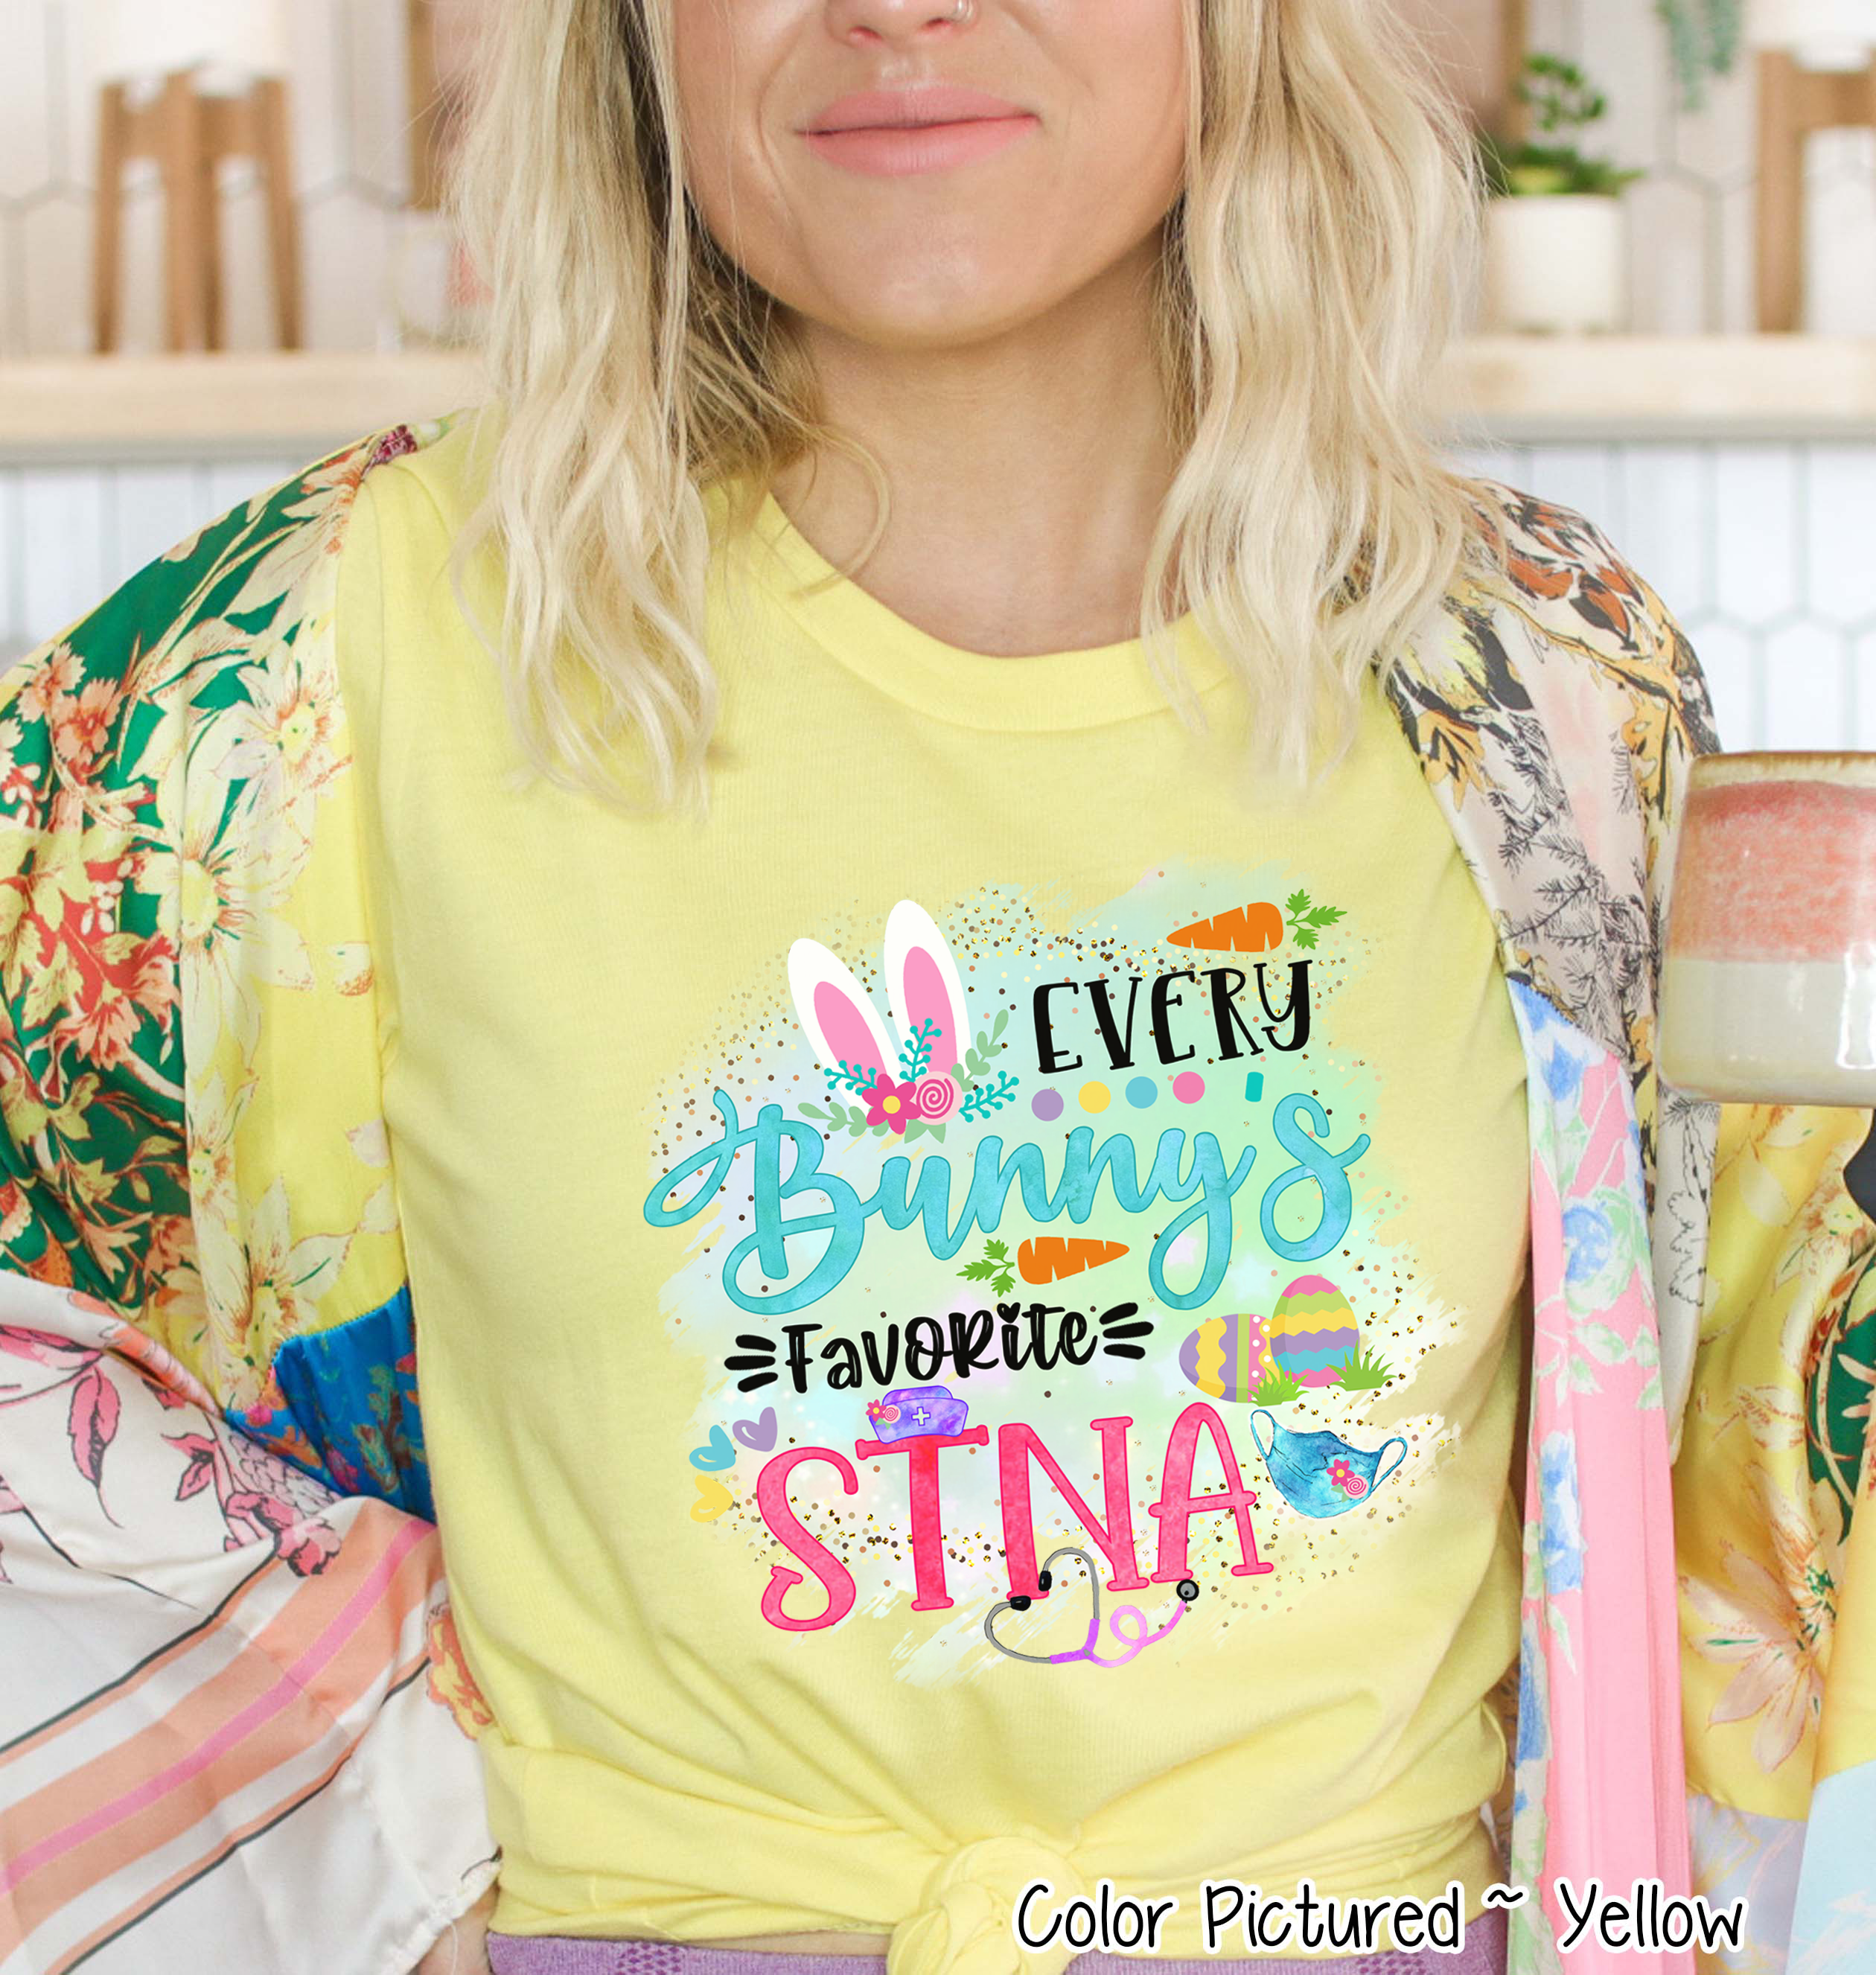 Every Bunny's Favorite STNA Easter Tee